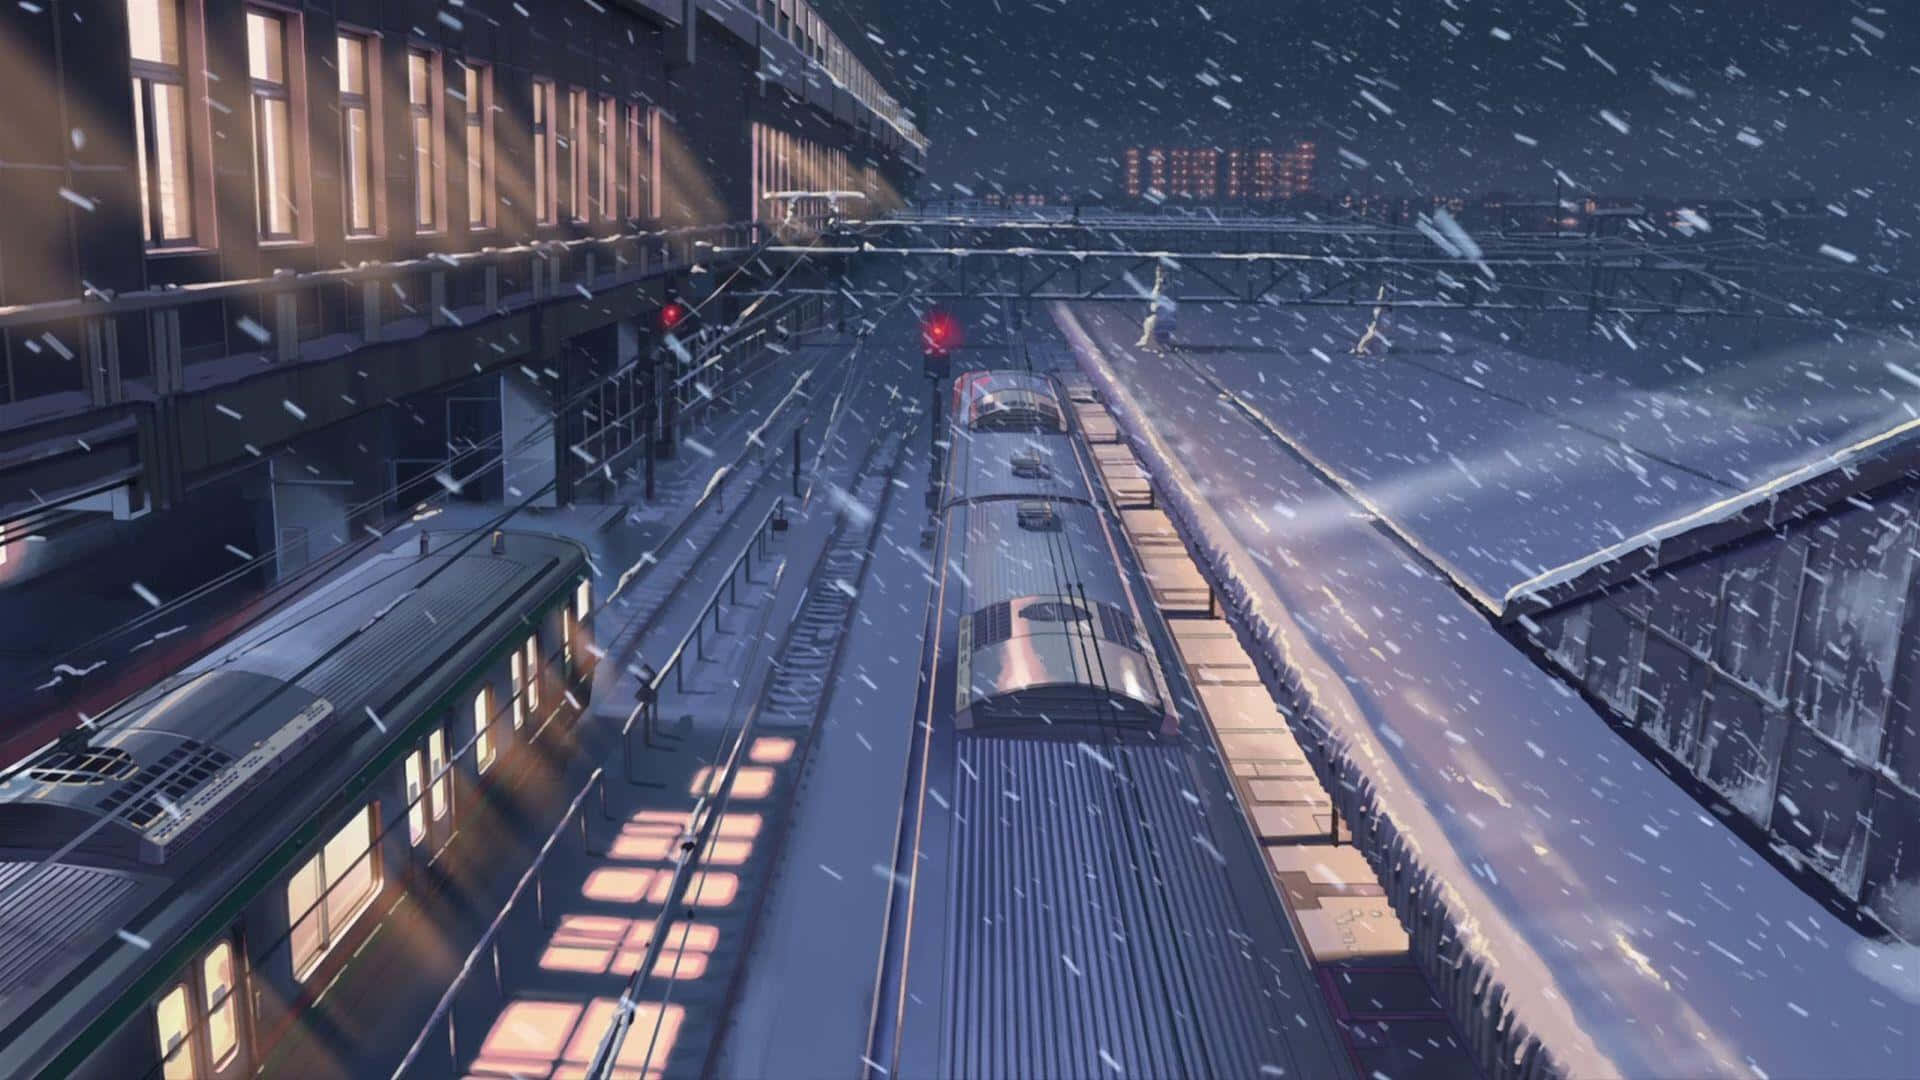 A delicate glimpse of the beauty of nature in 5 Centimeters Per Second.